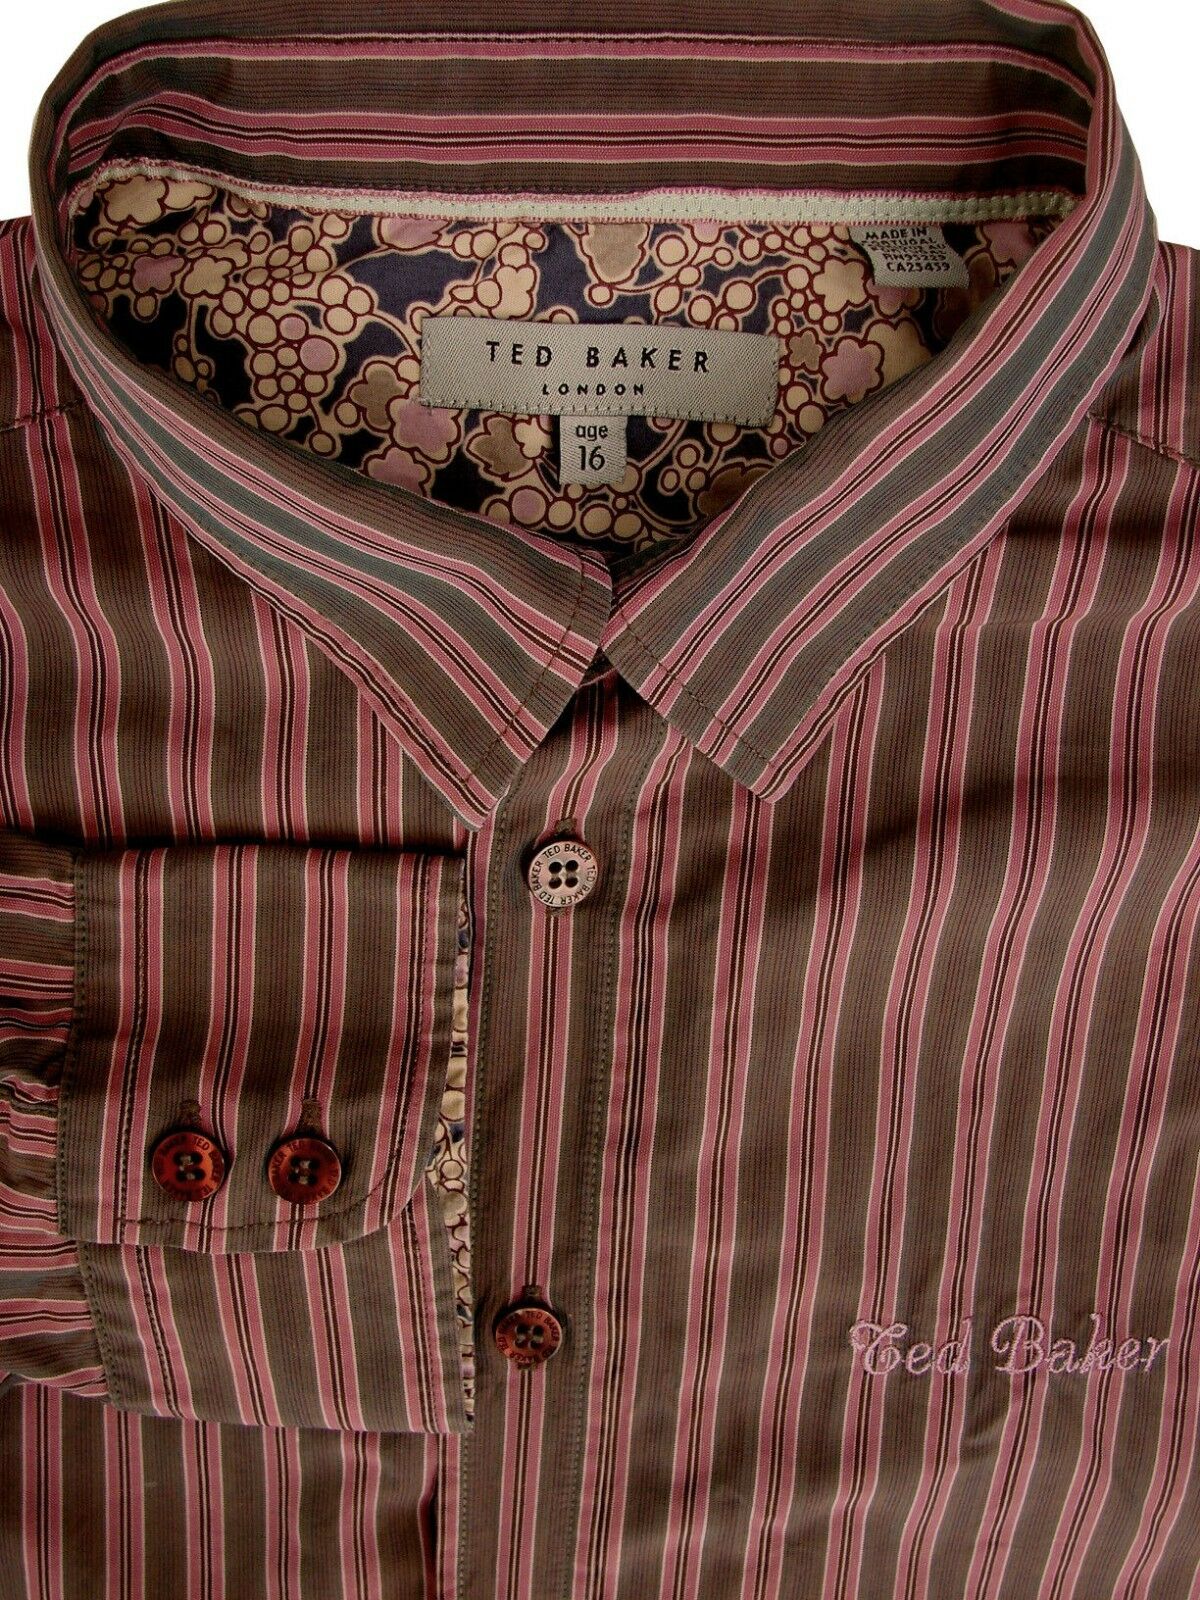 Ithaca Spaans Lunch TED BAKER Shirt Mens 14.5 S Boys AGE 16 Brown - Pink Stripes - Brandinity